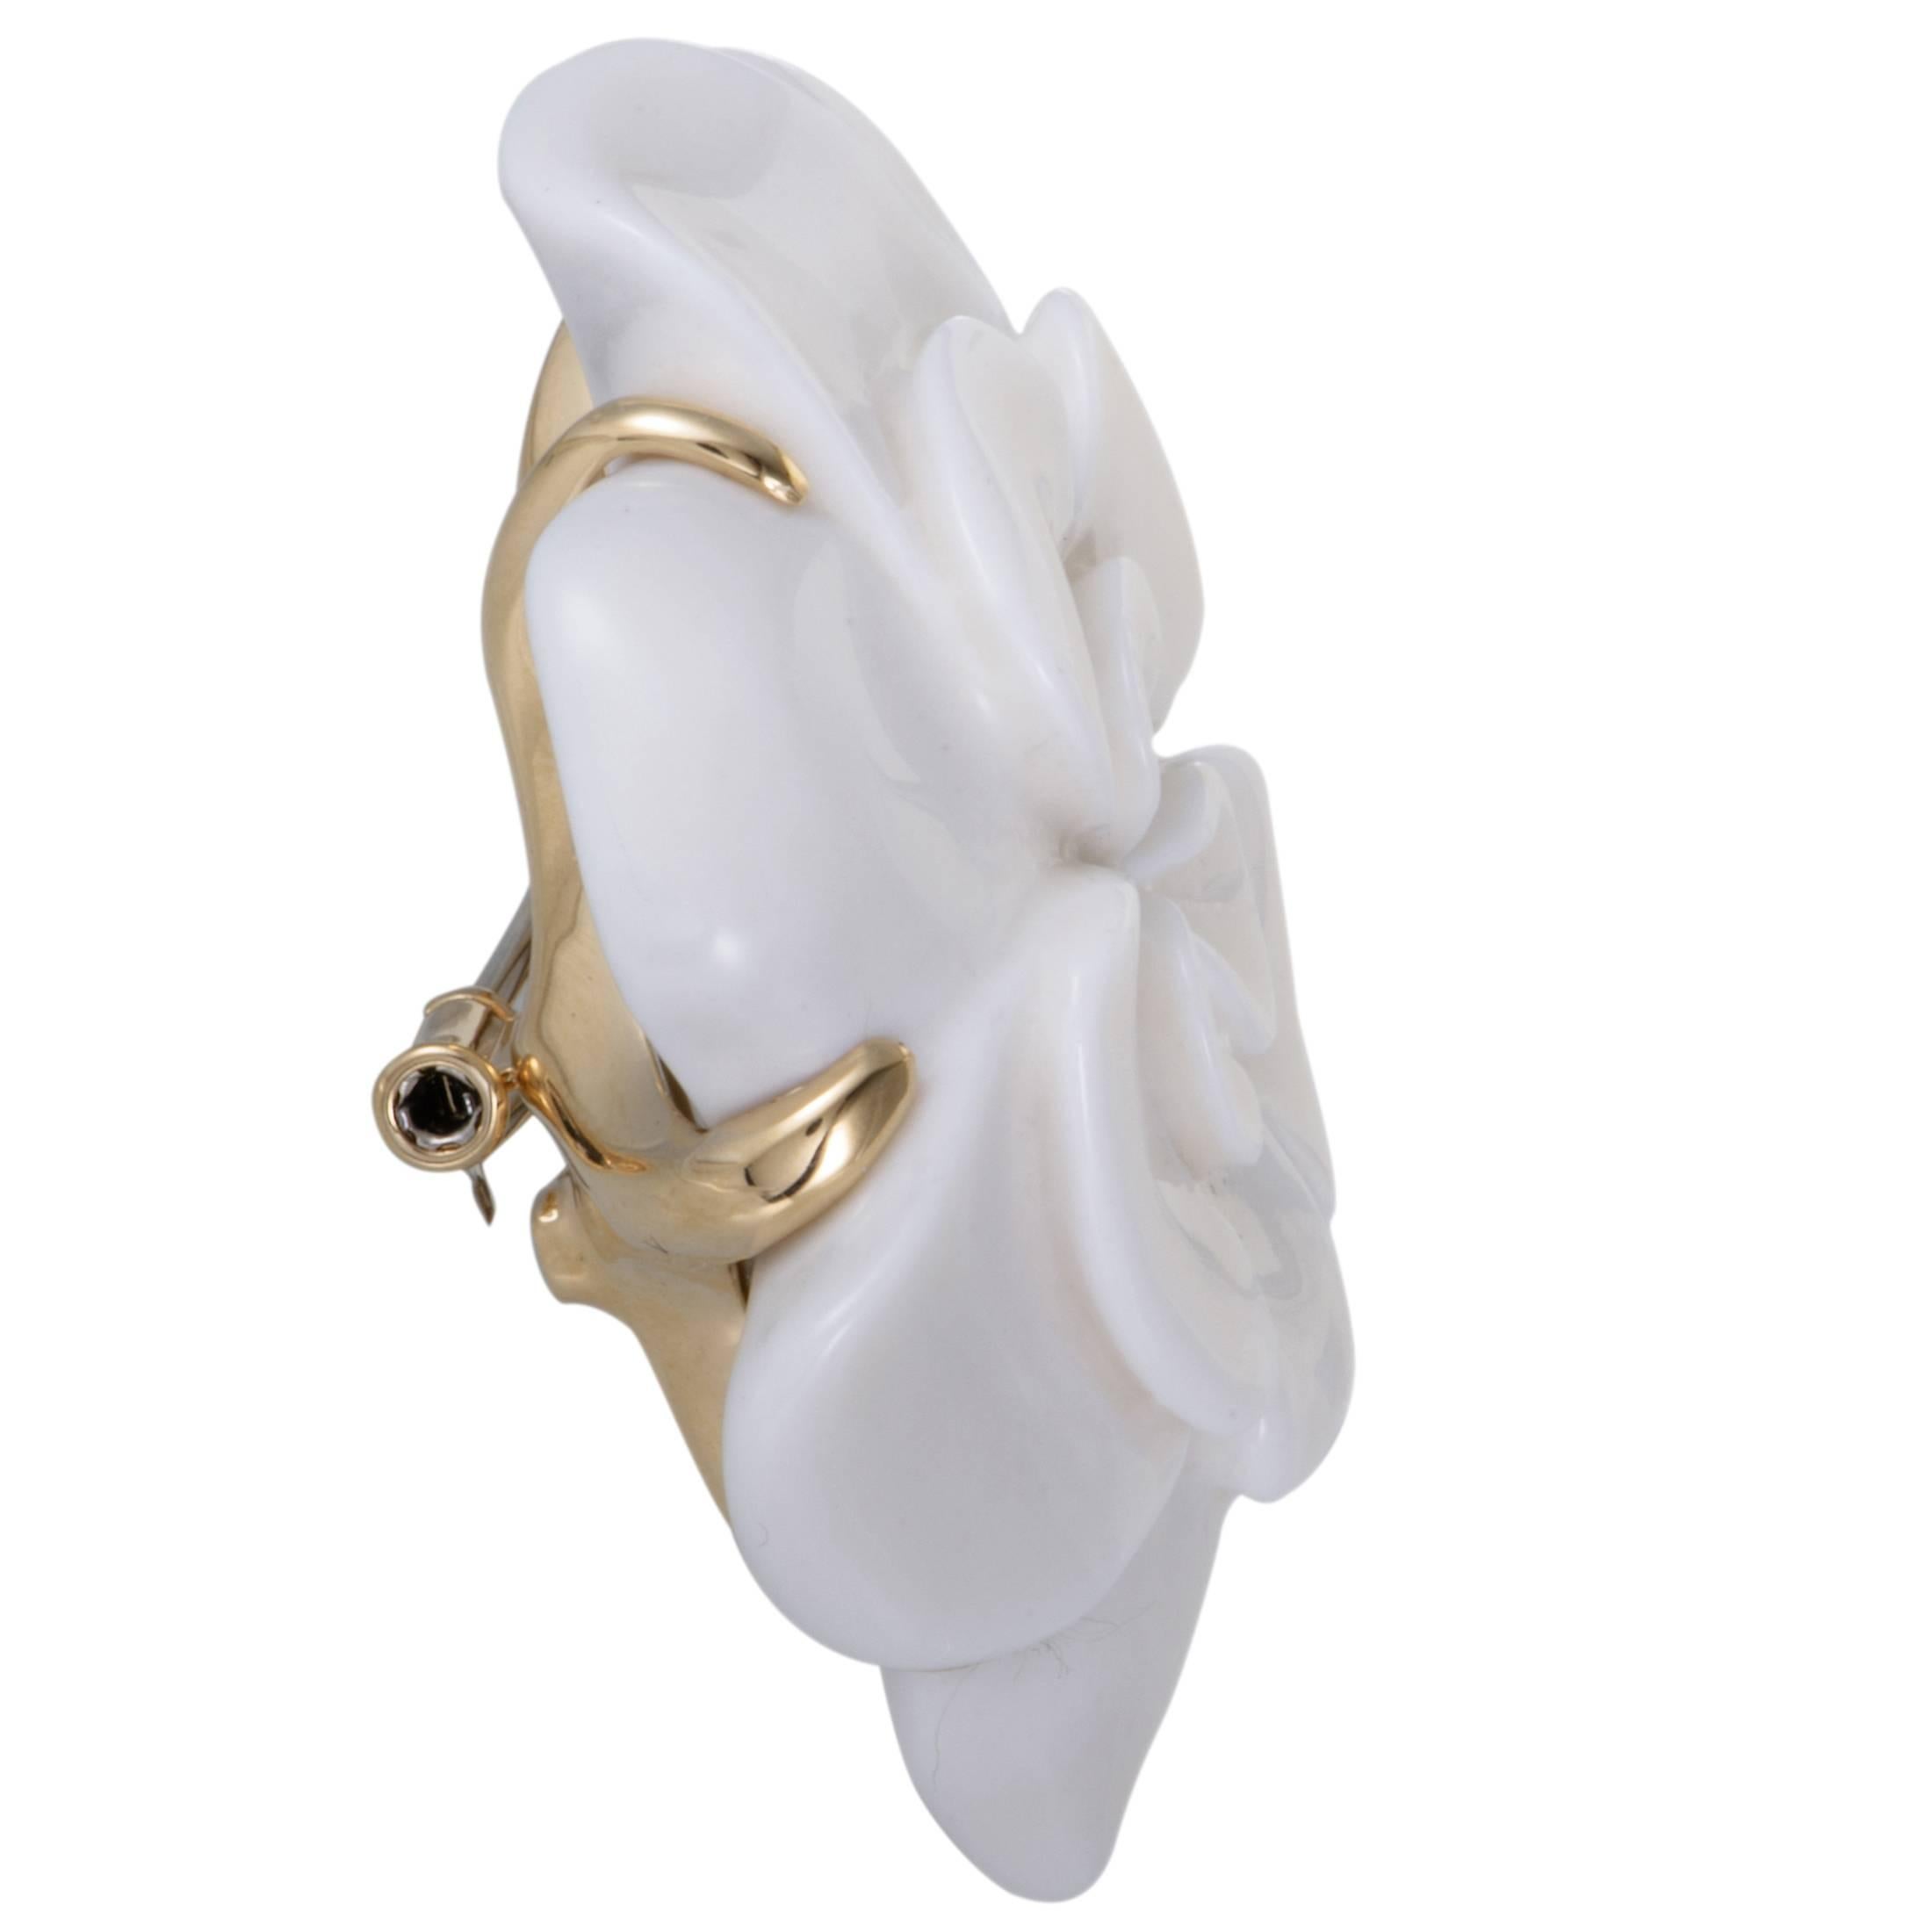 Gracefully designed in the shape of a majestic camellia, this precious brooch by Chanel is an elegant piece of accessory. Its aesthetic floral design is adorned in the classy polish of white onyx and shimmering 18K yellow gold.
Included Items: